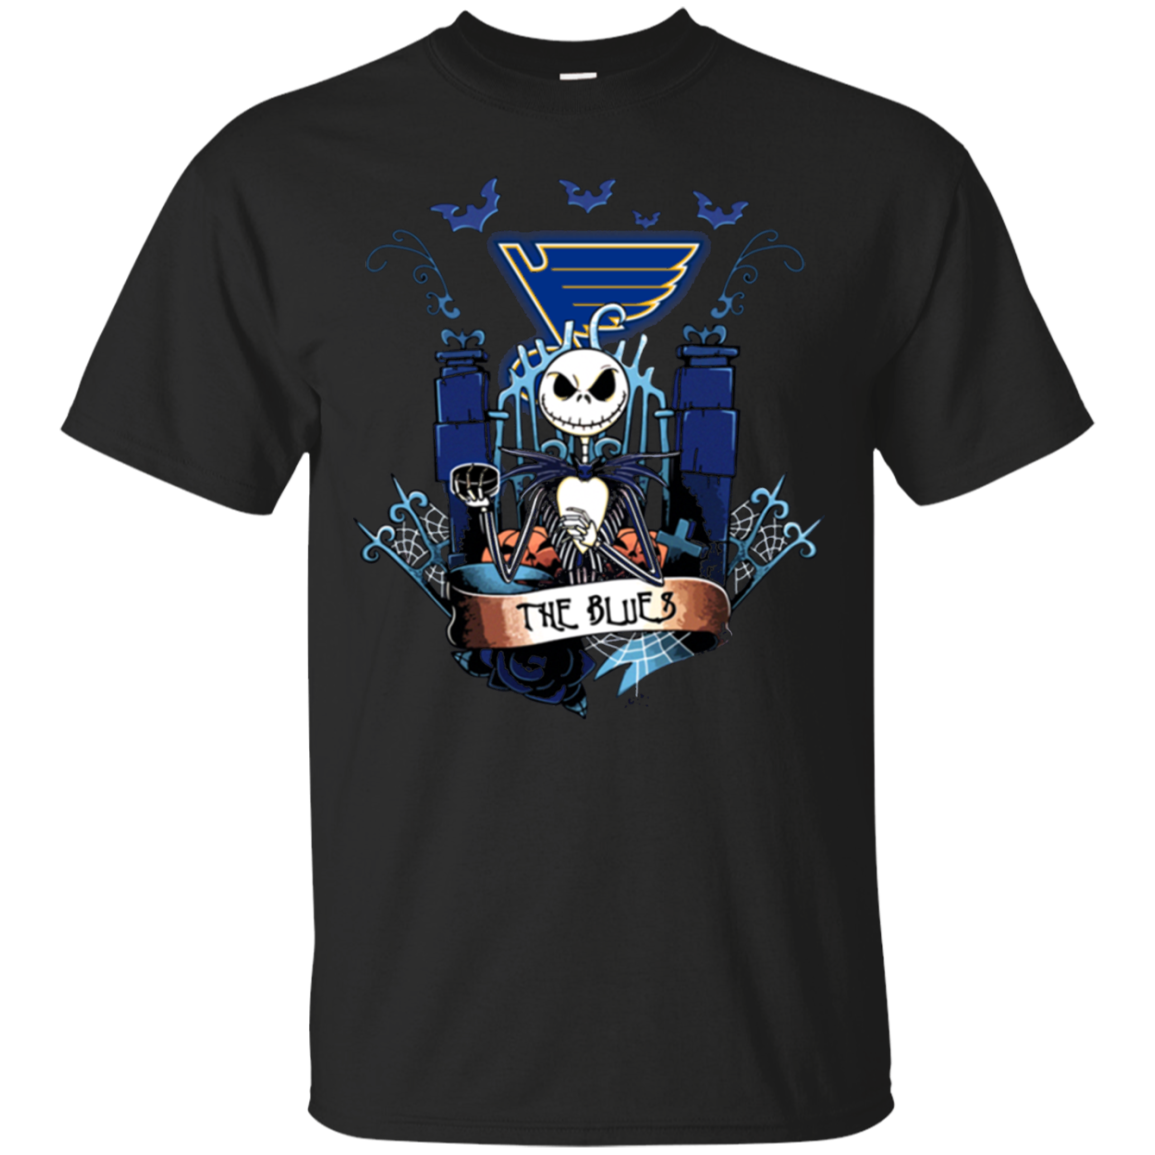 Cover Your Body With Amazing St. Louis Blues Halloween The Nightmare Before Christmas Shir Shirts